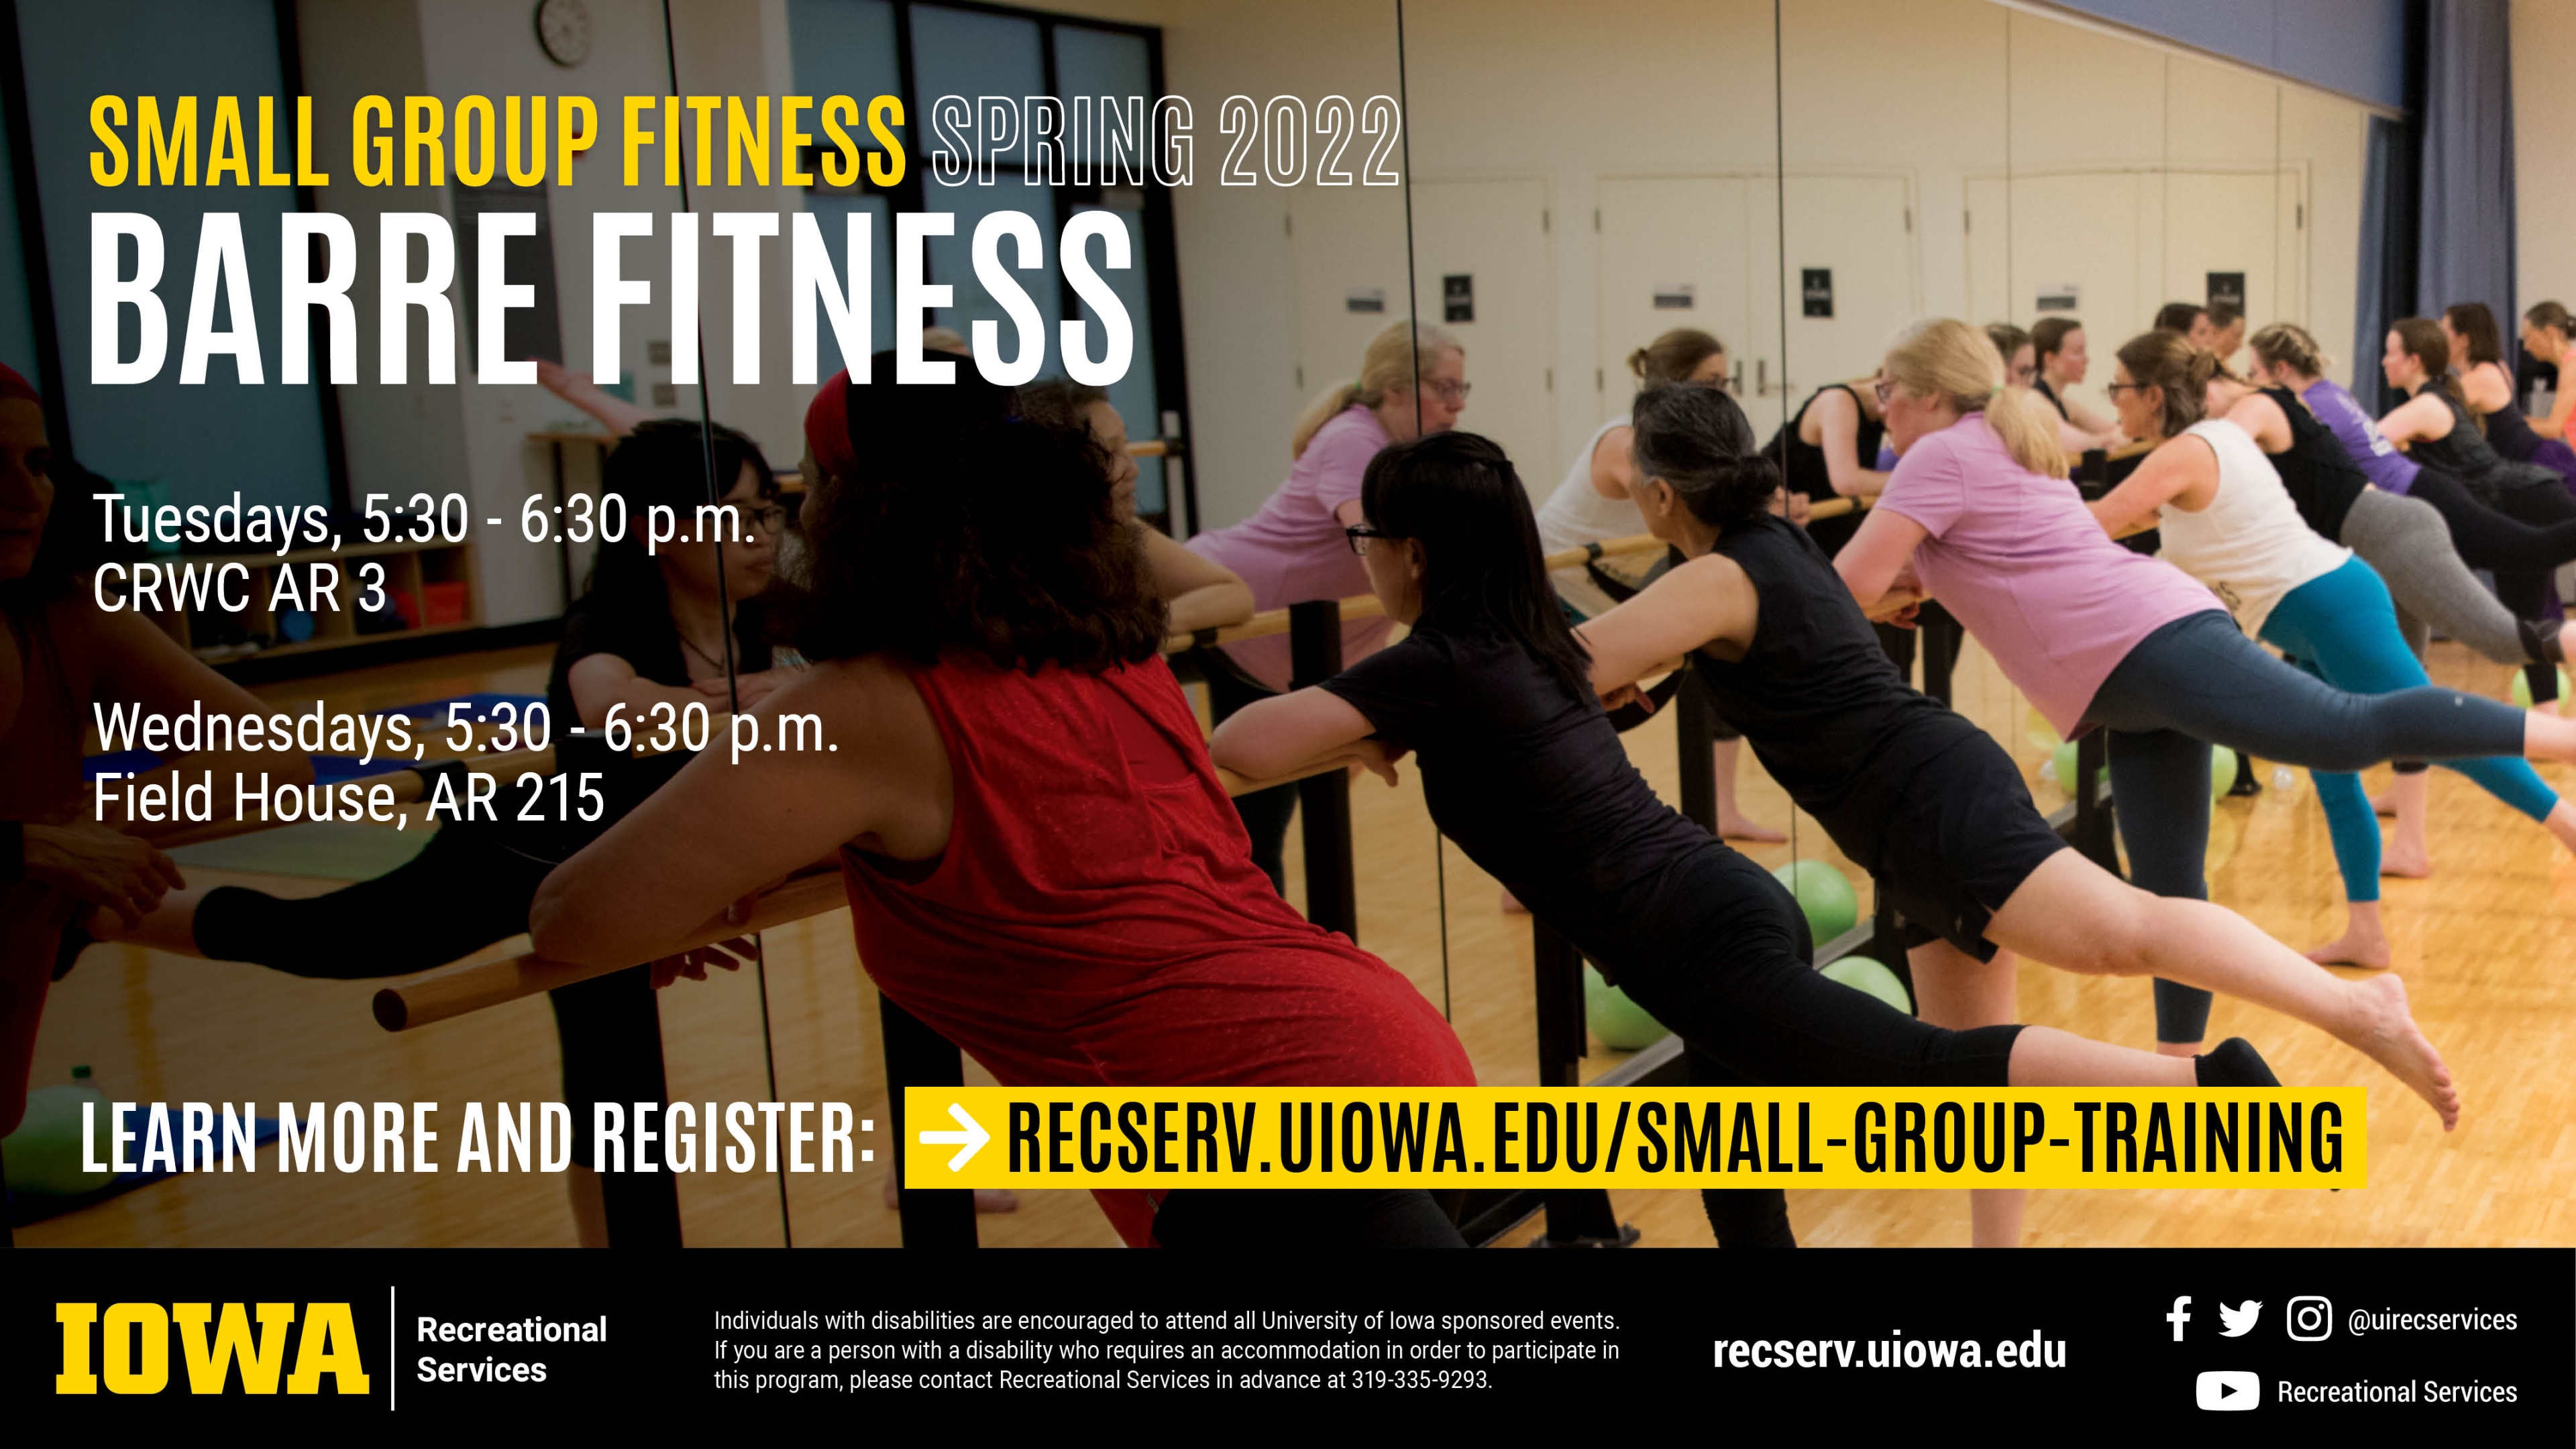 Small Group Fitness Spring 2022 Barre Fitness Tuesdays, 5:30 - 6:30 pm. CRWC AR3 Wednesdays, 5:30 - 6:30 p.m. Learn more and register at recserv.uiowa.edu/small-group-training